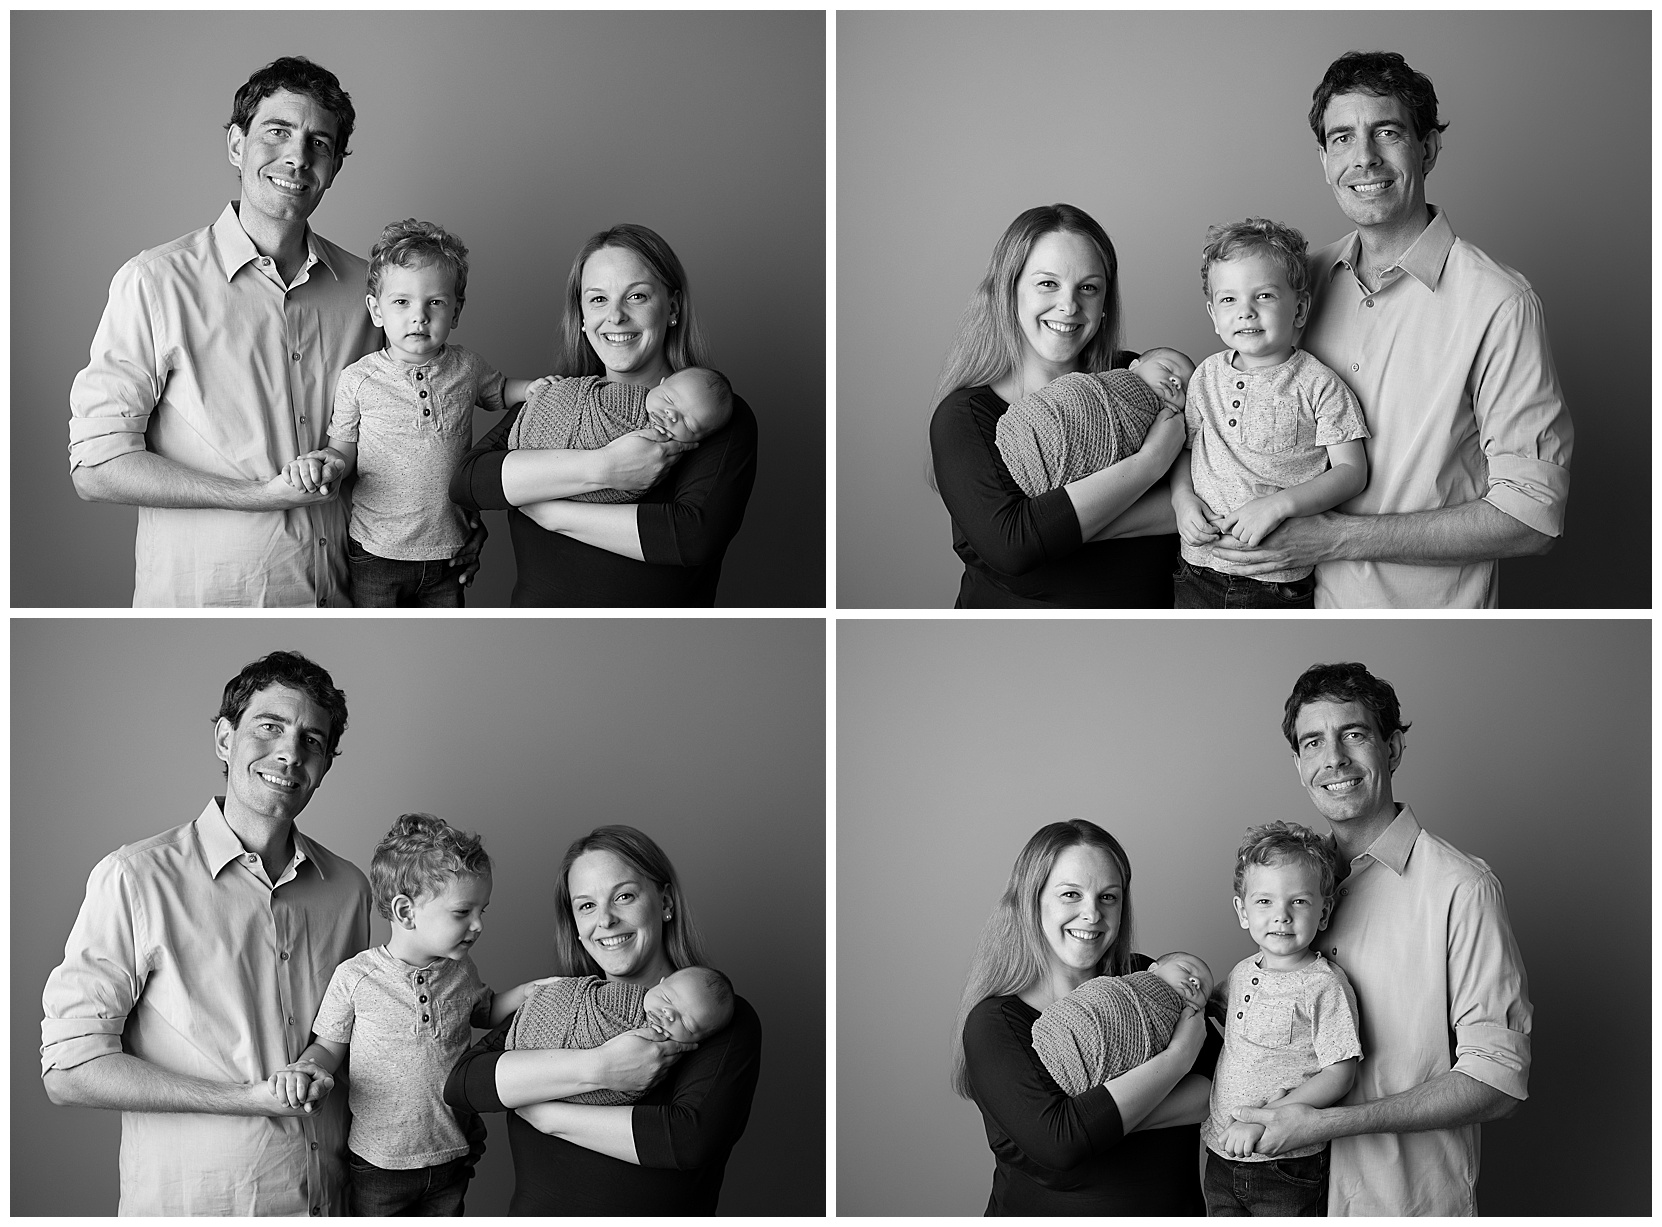 Series of four black and white photos of family consisting of father, toddler, newborn, and mother